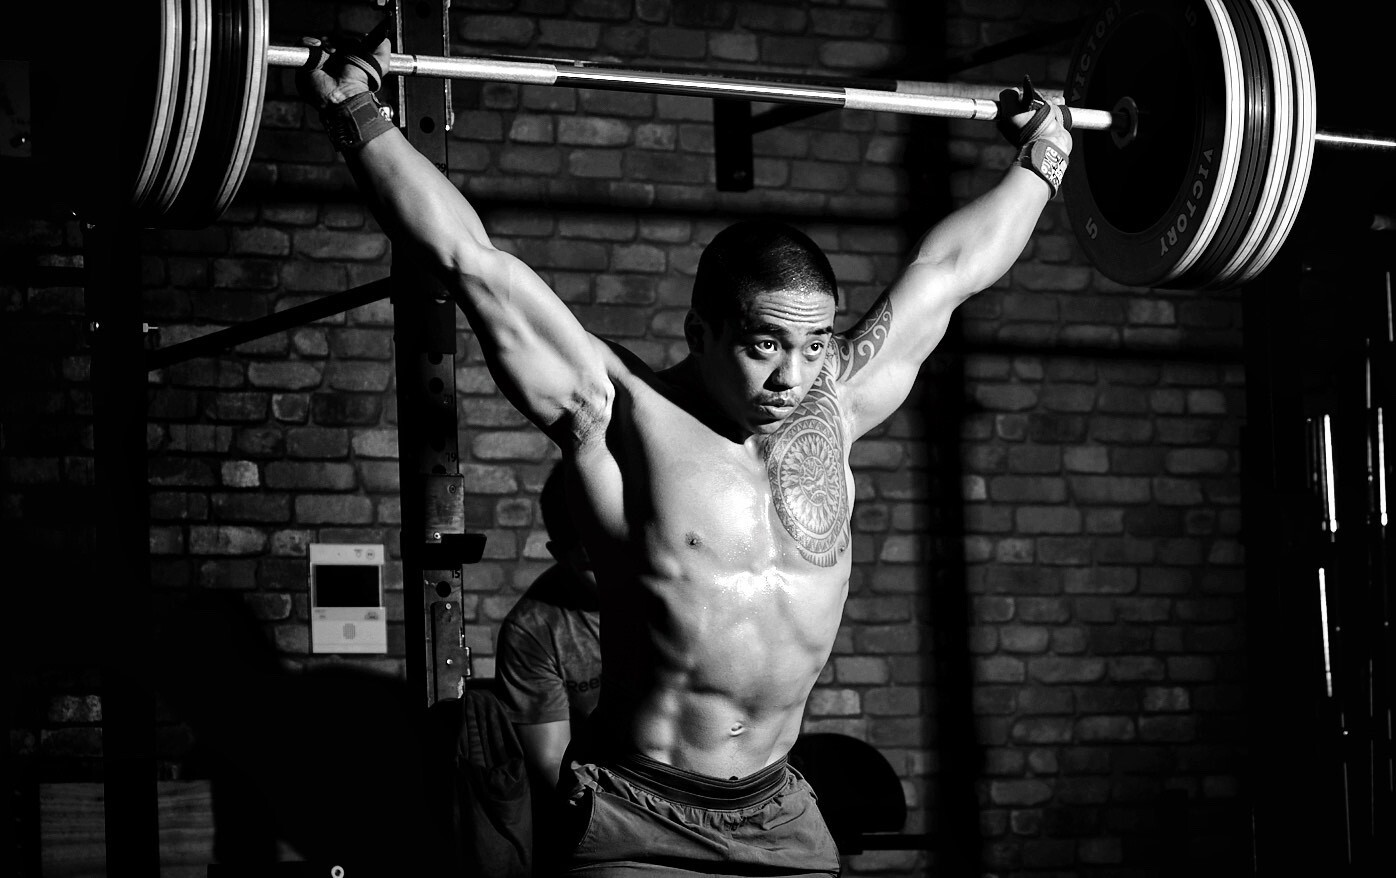 Zhu Yusen, Taiwan’s fittest man in 2018, 2019 and 2020, says he and other CrossFitters are ‘angry’ about competing under China’s flag. Photo: Handout